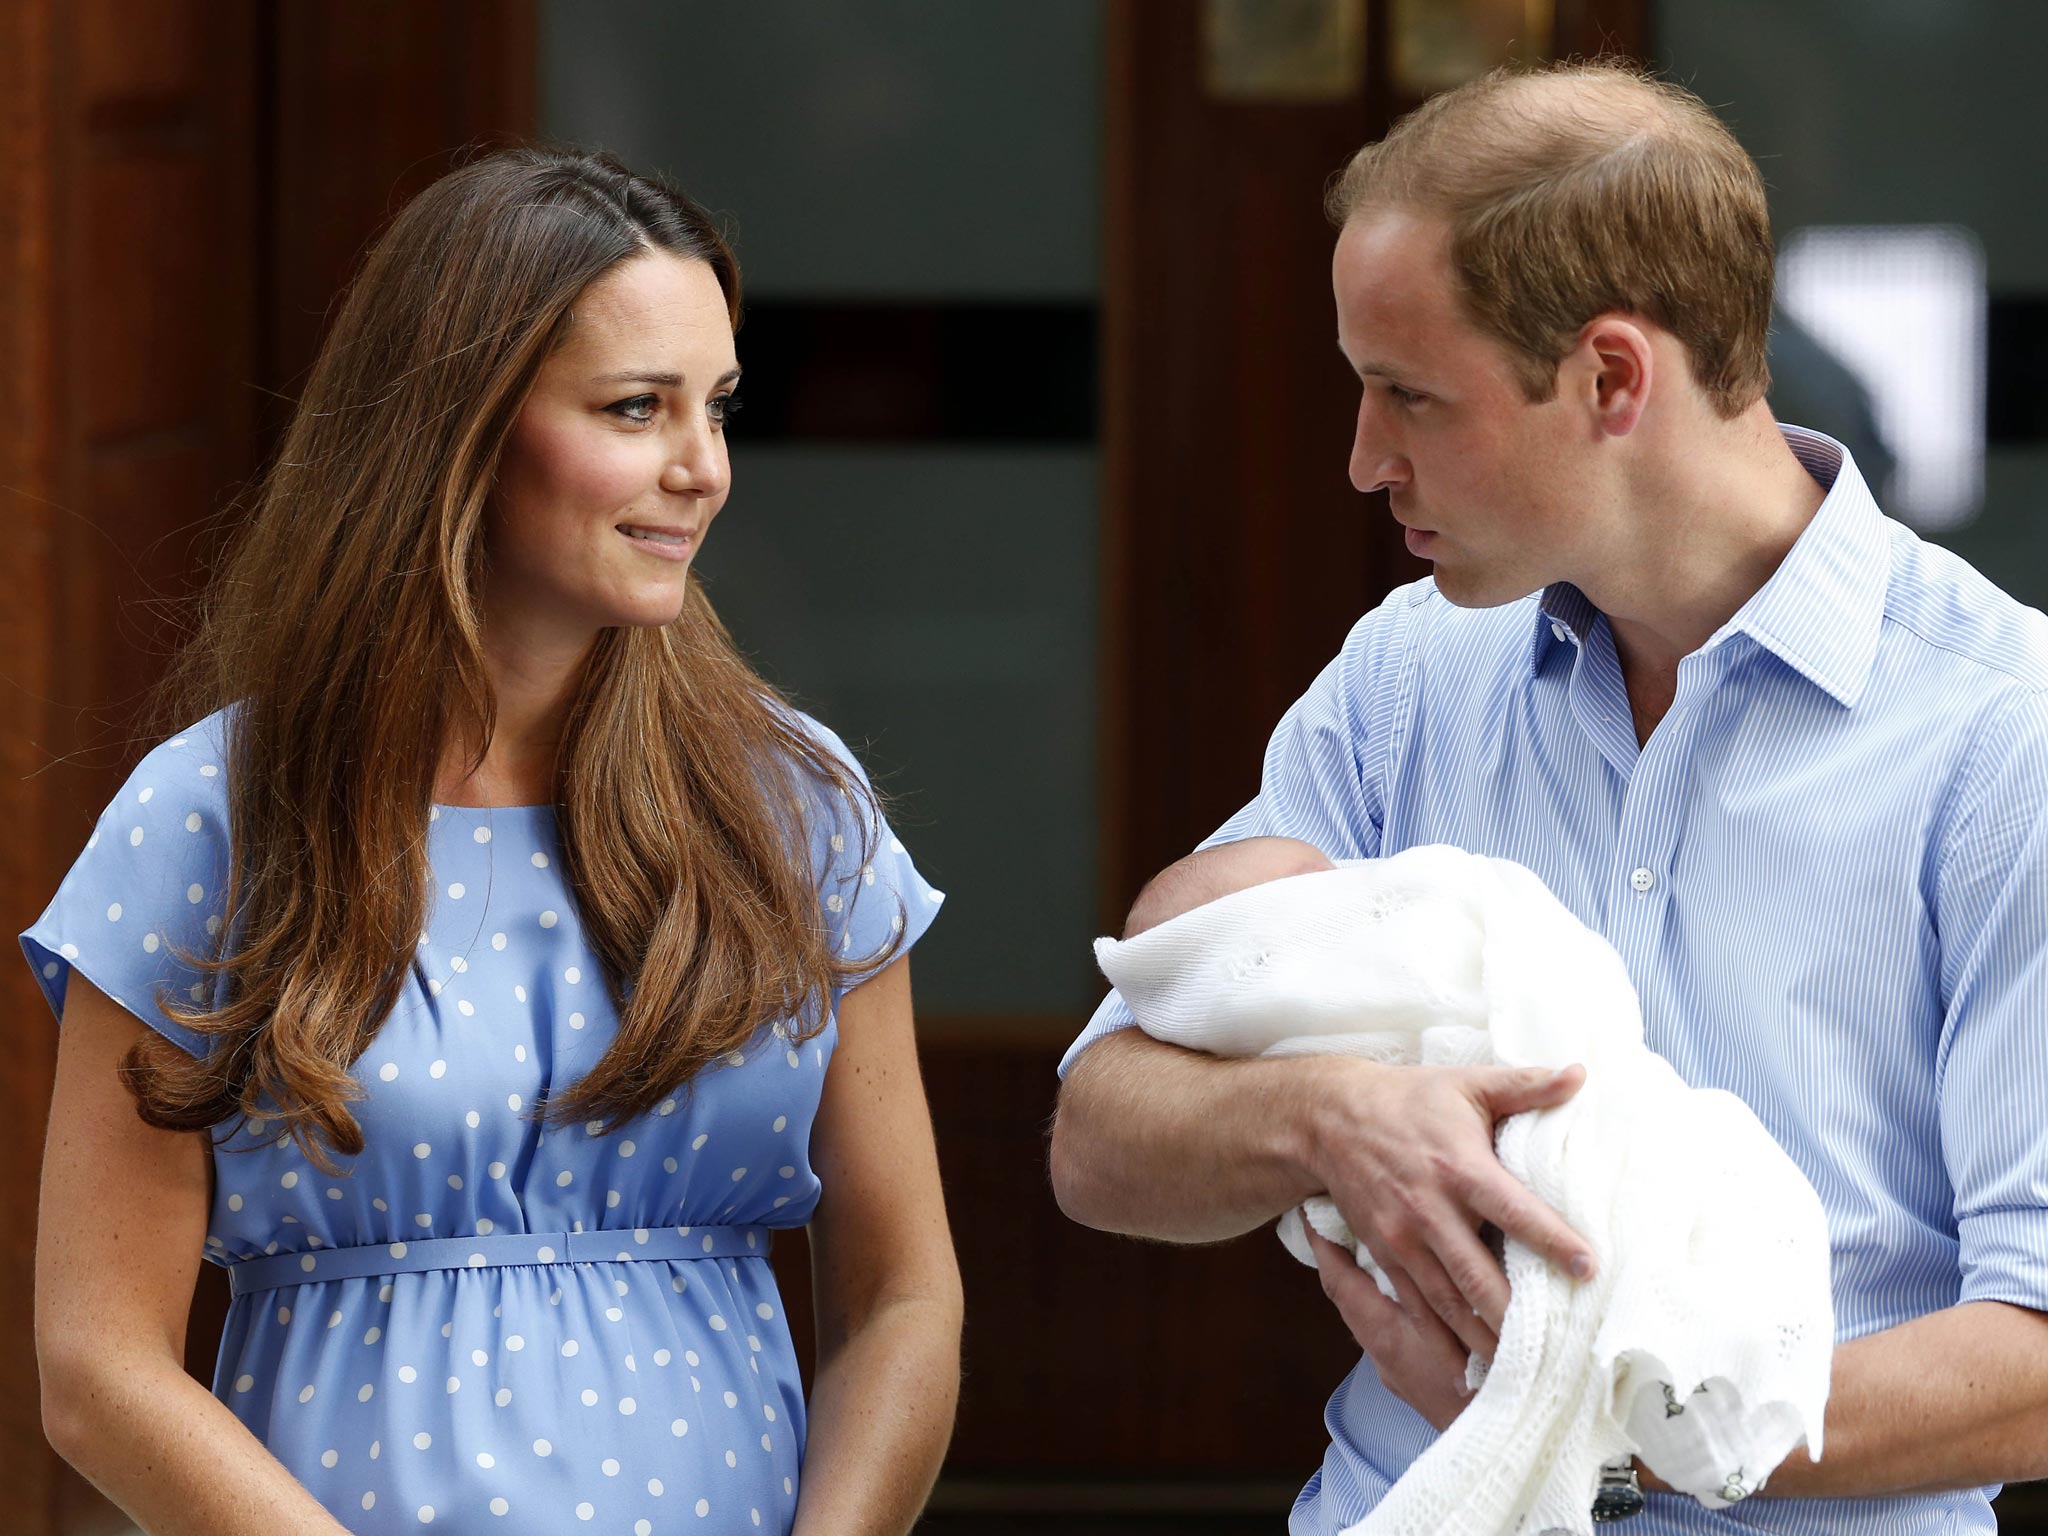 Prince William and Catherine the Duchess of Cambridge hold the Prince of Cambridge as he makes his first public appearance on 23 July 2013 (AP)